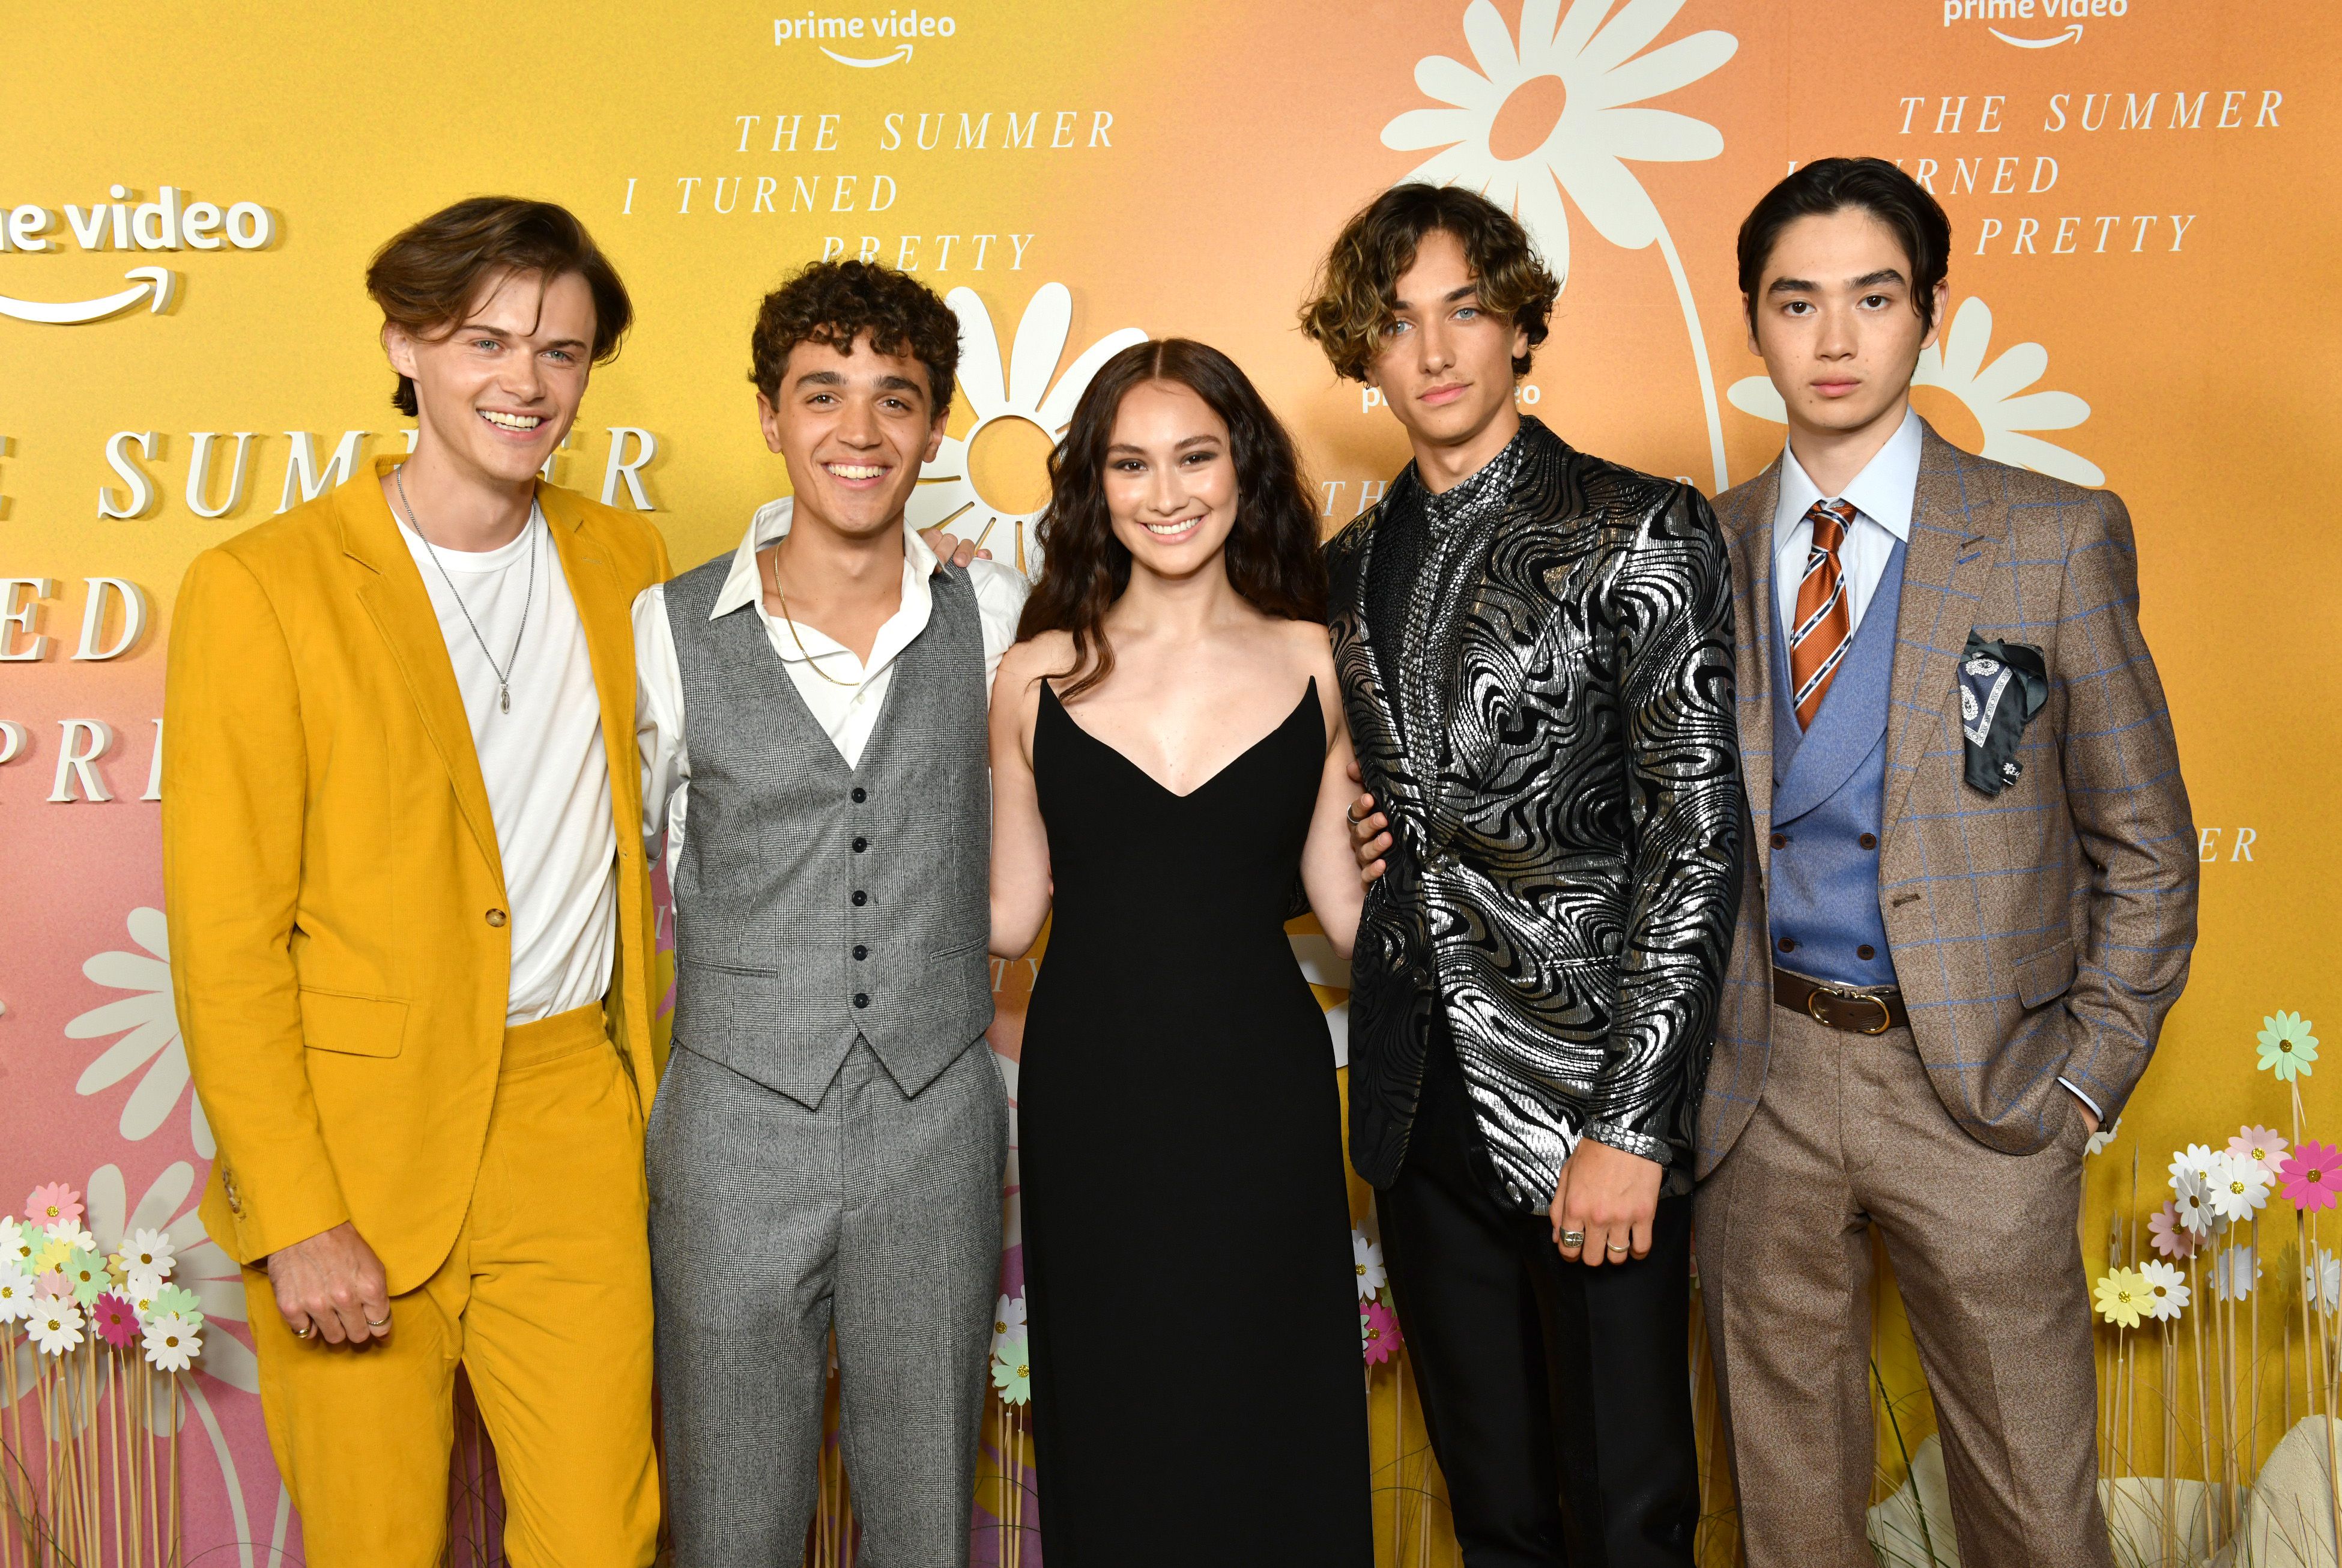 Christopher Briney, David Iacono, Lola Tung, Gavin Casalegno and Sean Kaufman during the New York City premiere of "The Summer I Turned Pretty" on June 14, 2022, in New York City. | Source: Getty Images